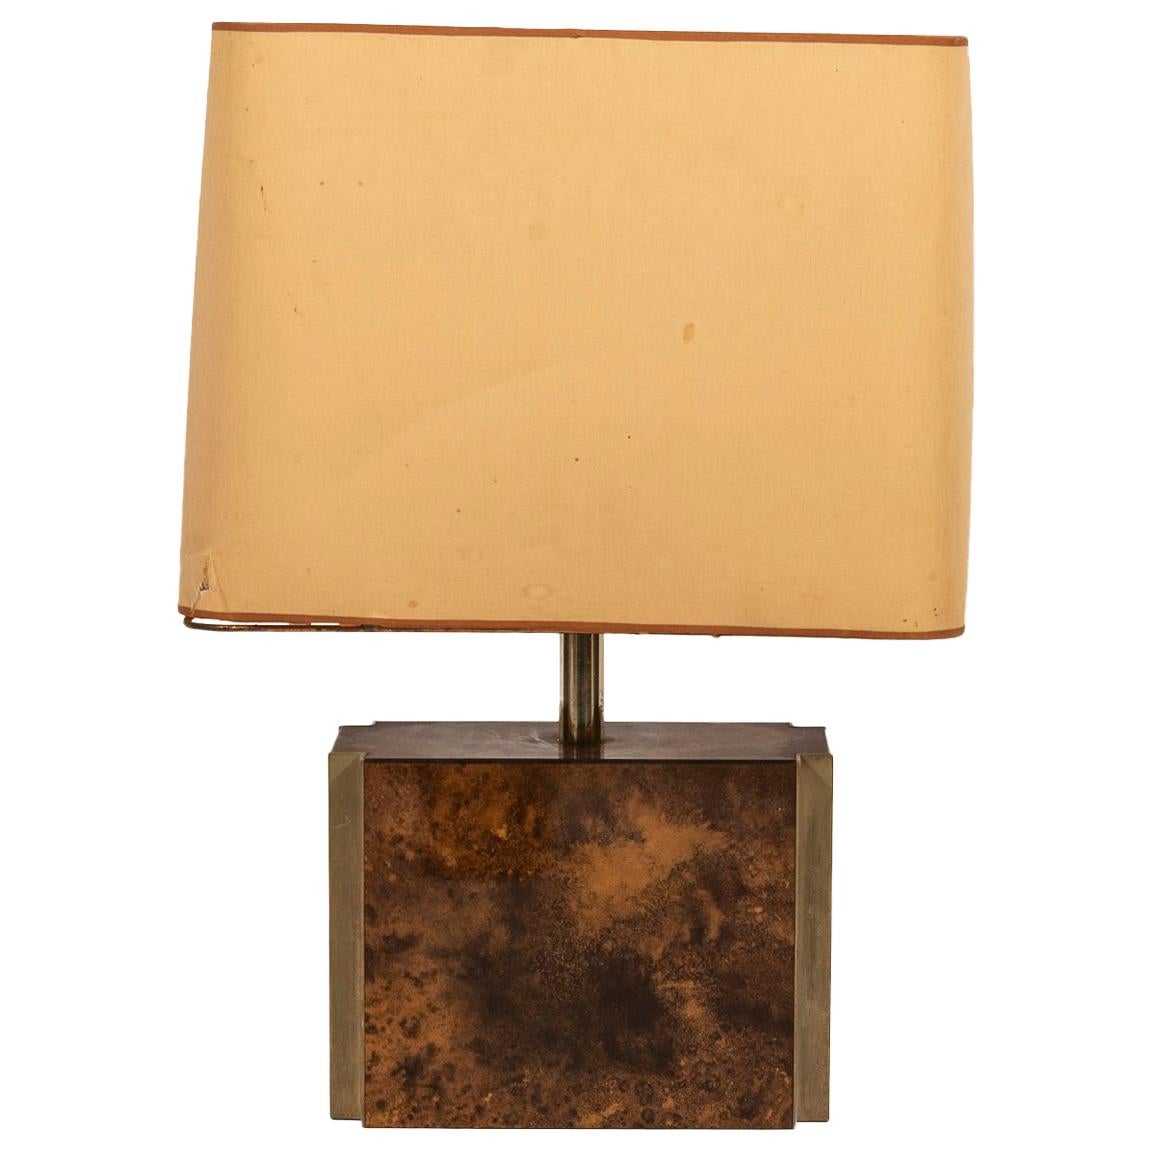 Guy Lefevre for Jansen, Pair of Table Lamps, Amber Lacquer, circa 1970, France